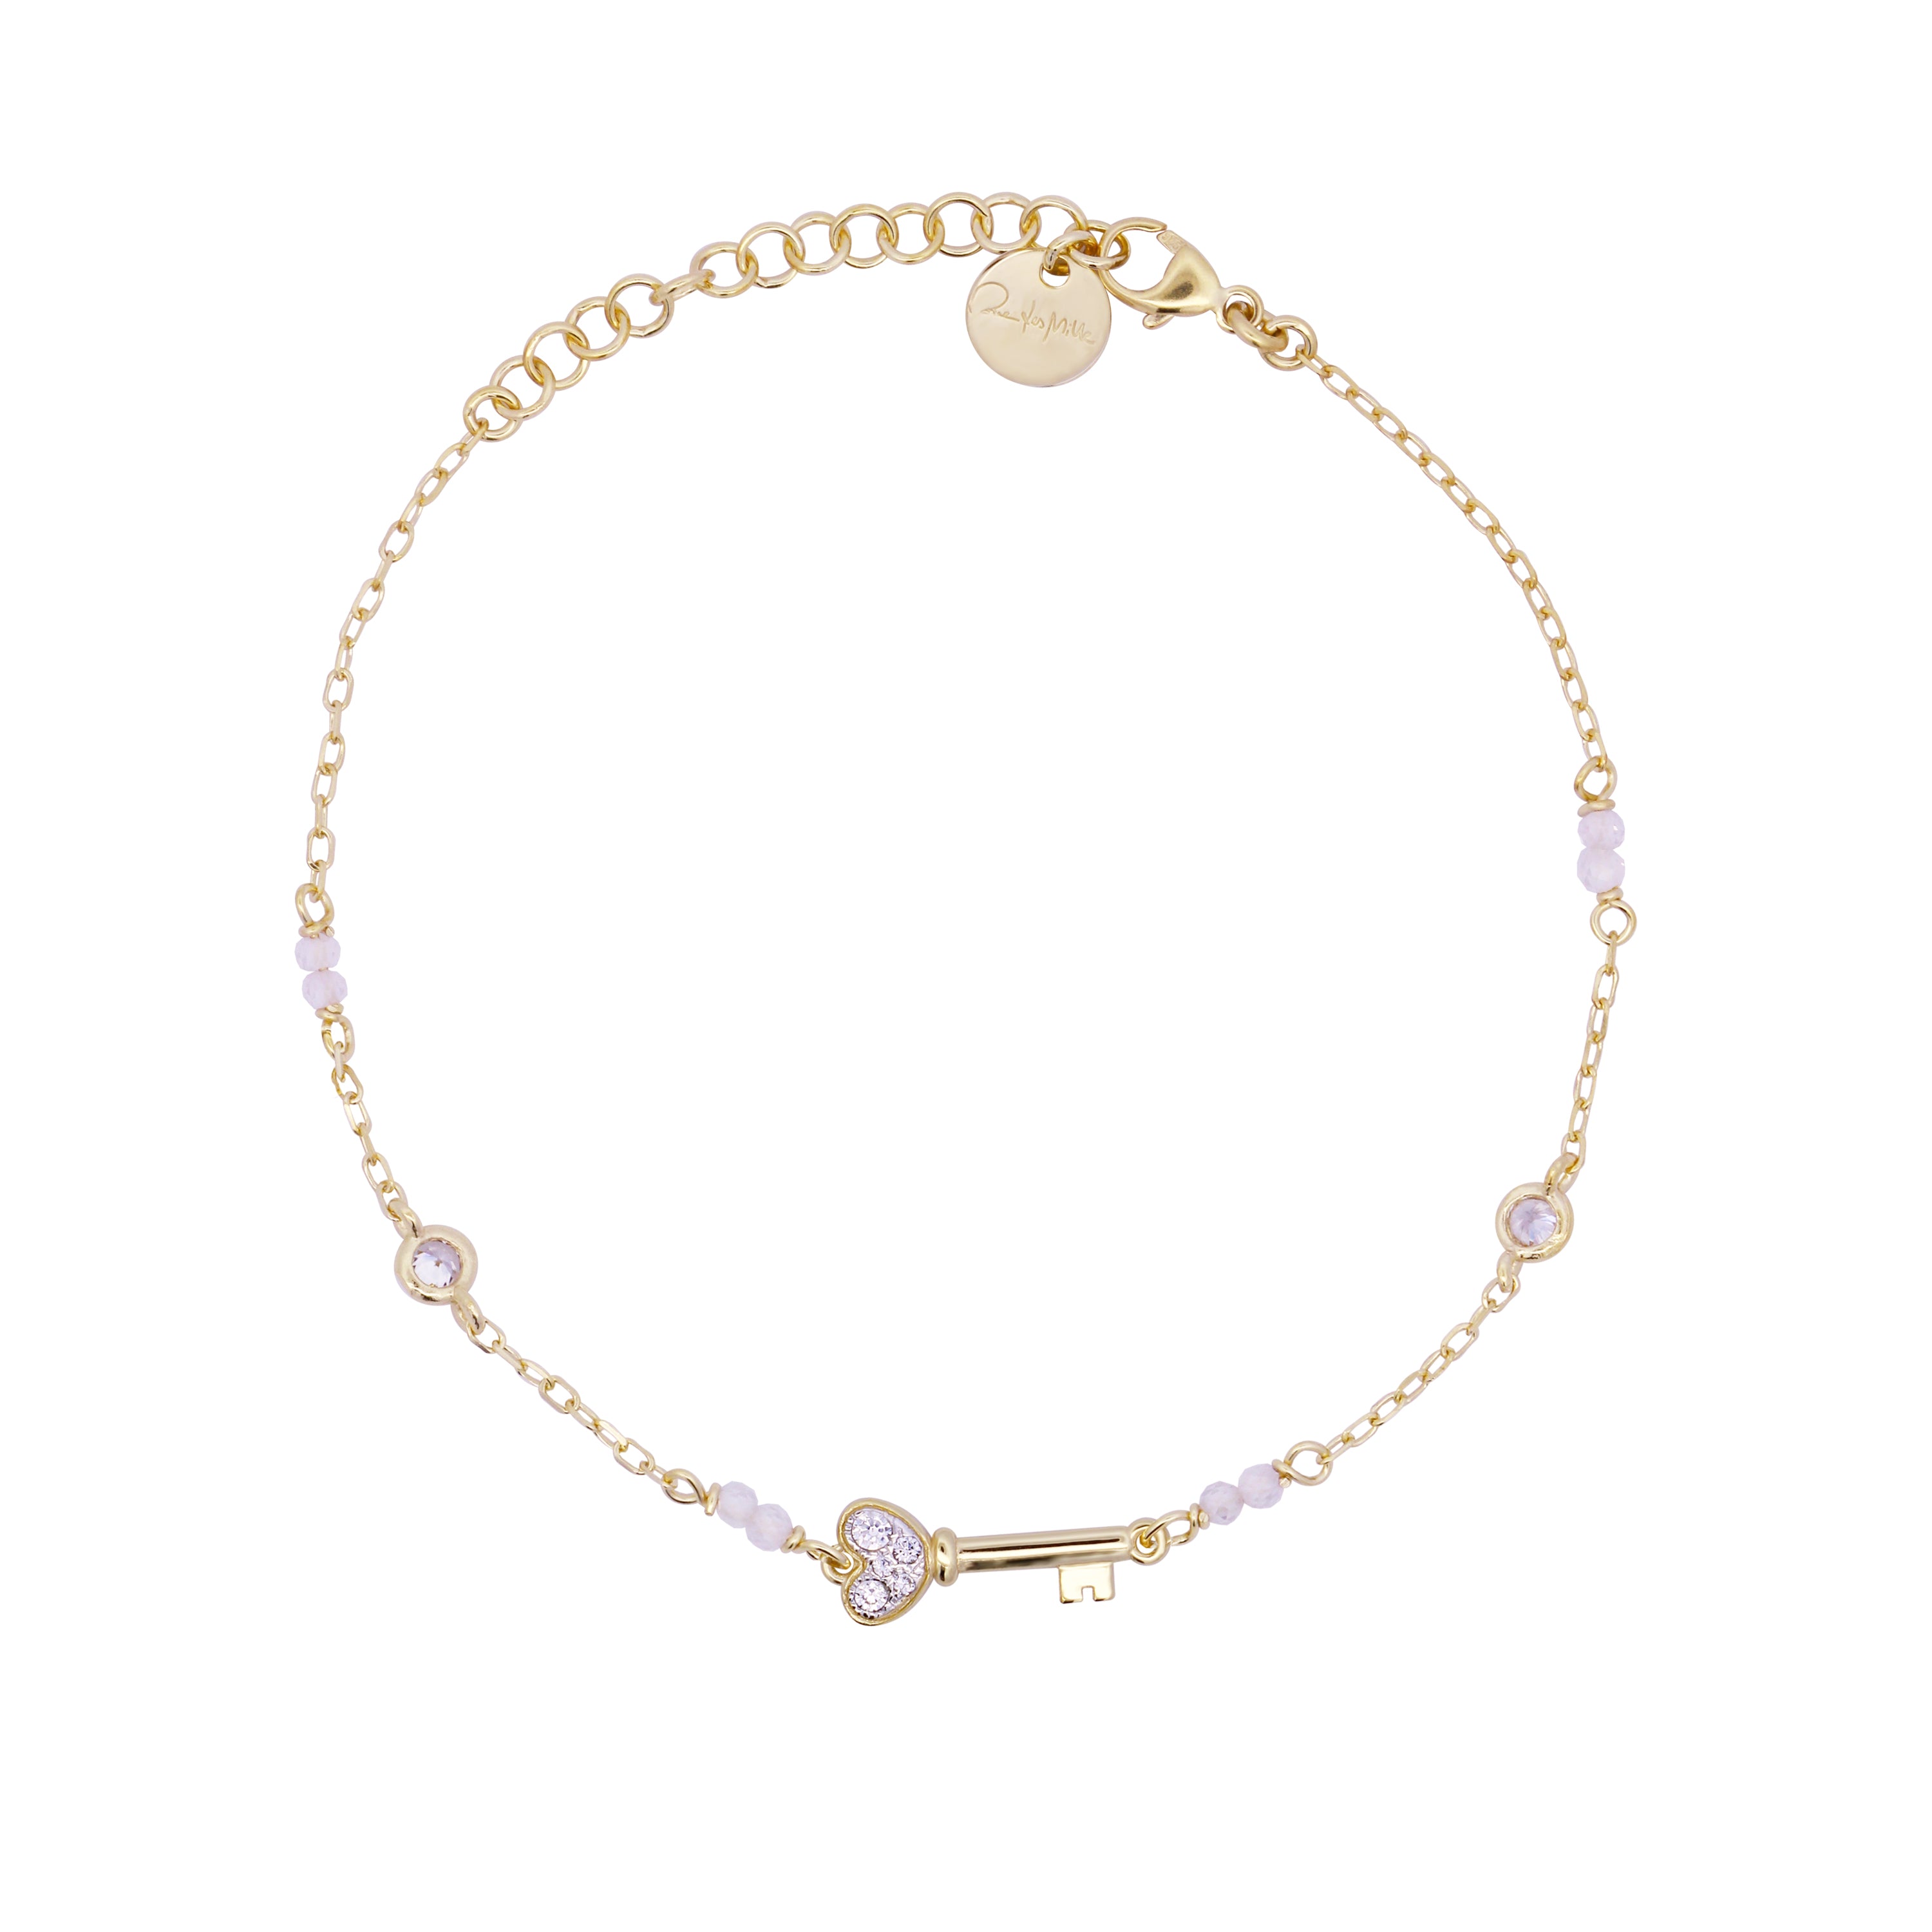 Bracelet with bezels and small pavé Key subject - STRADUST TEN